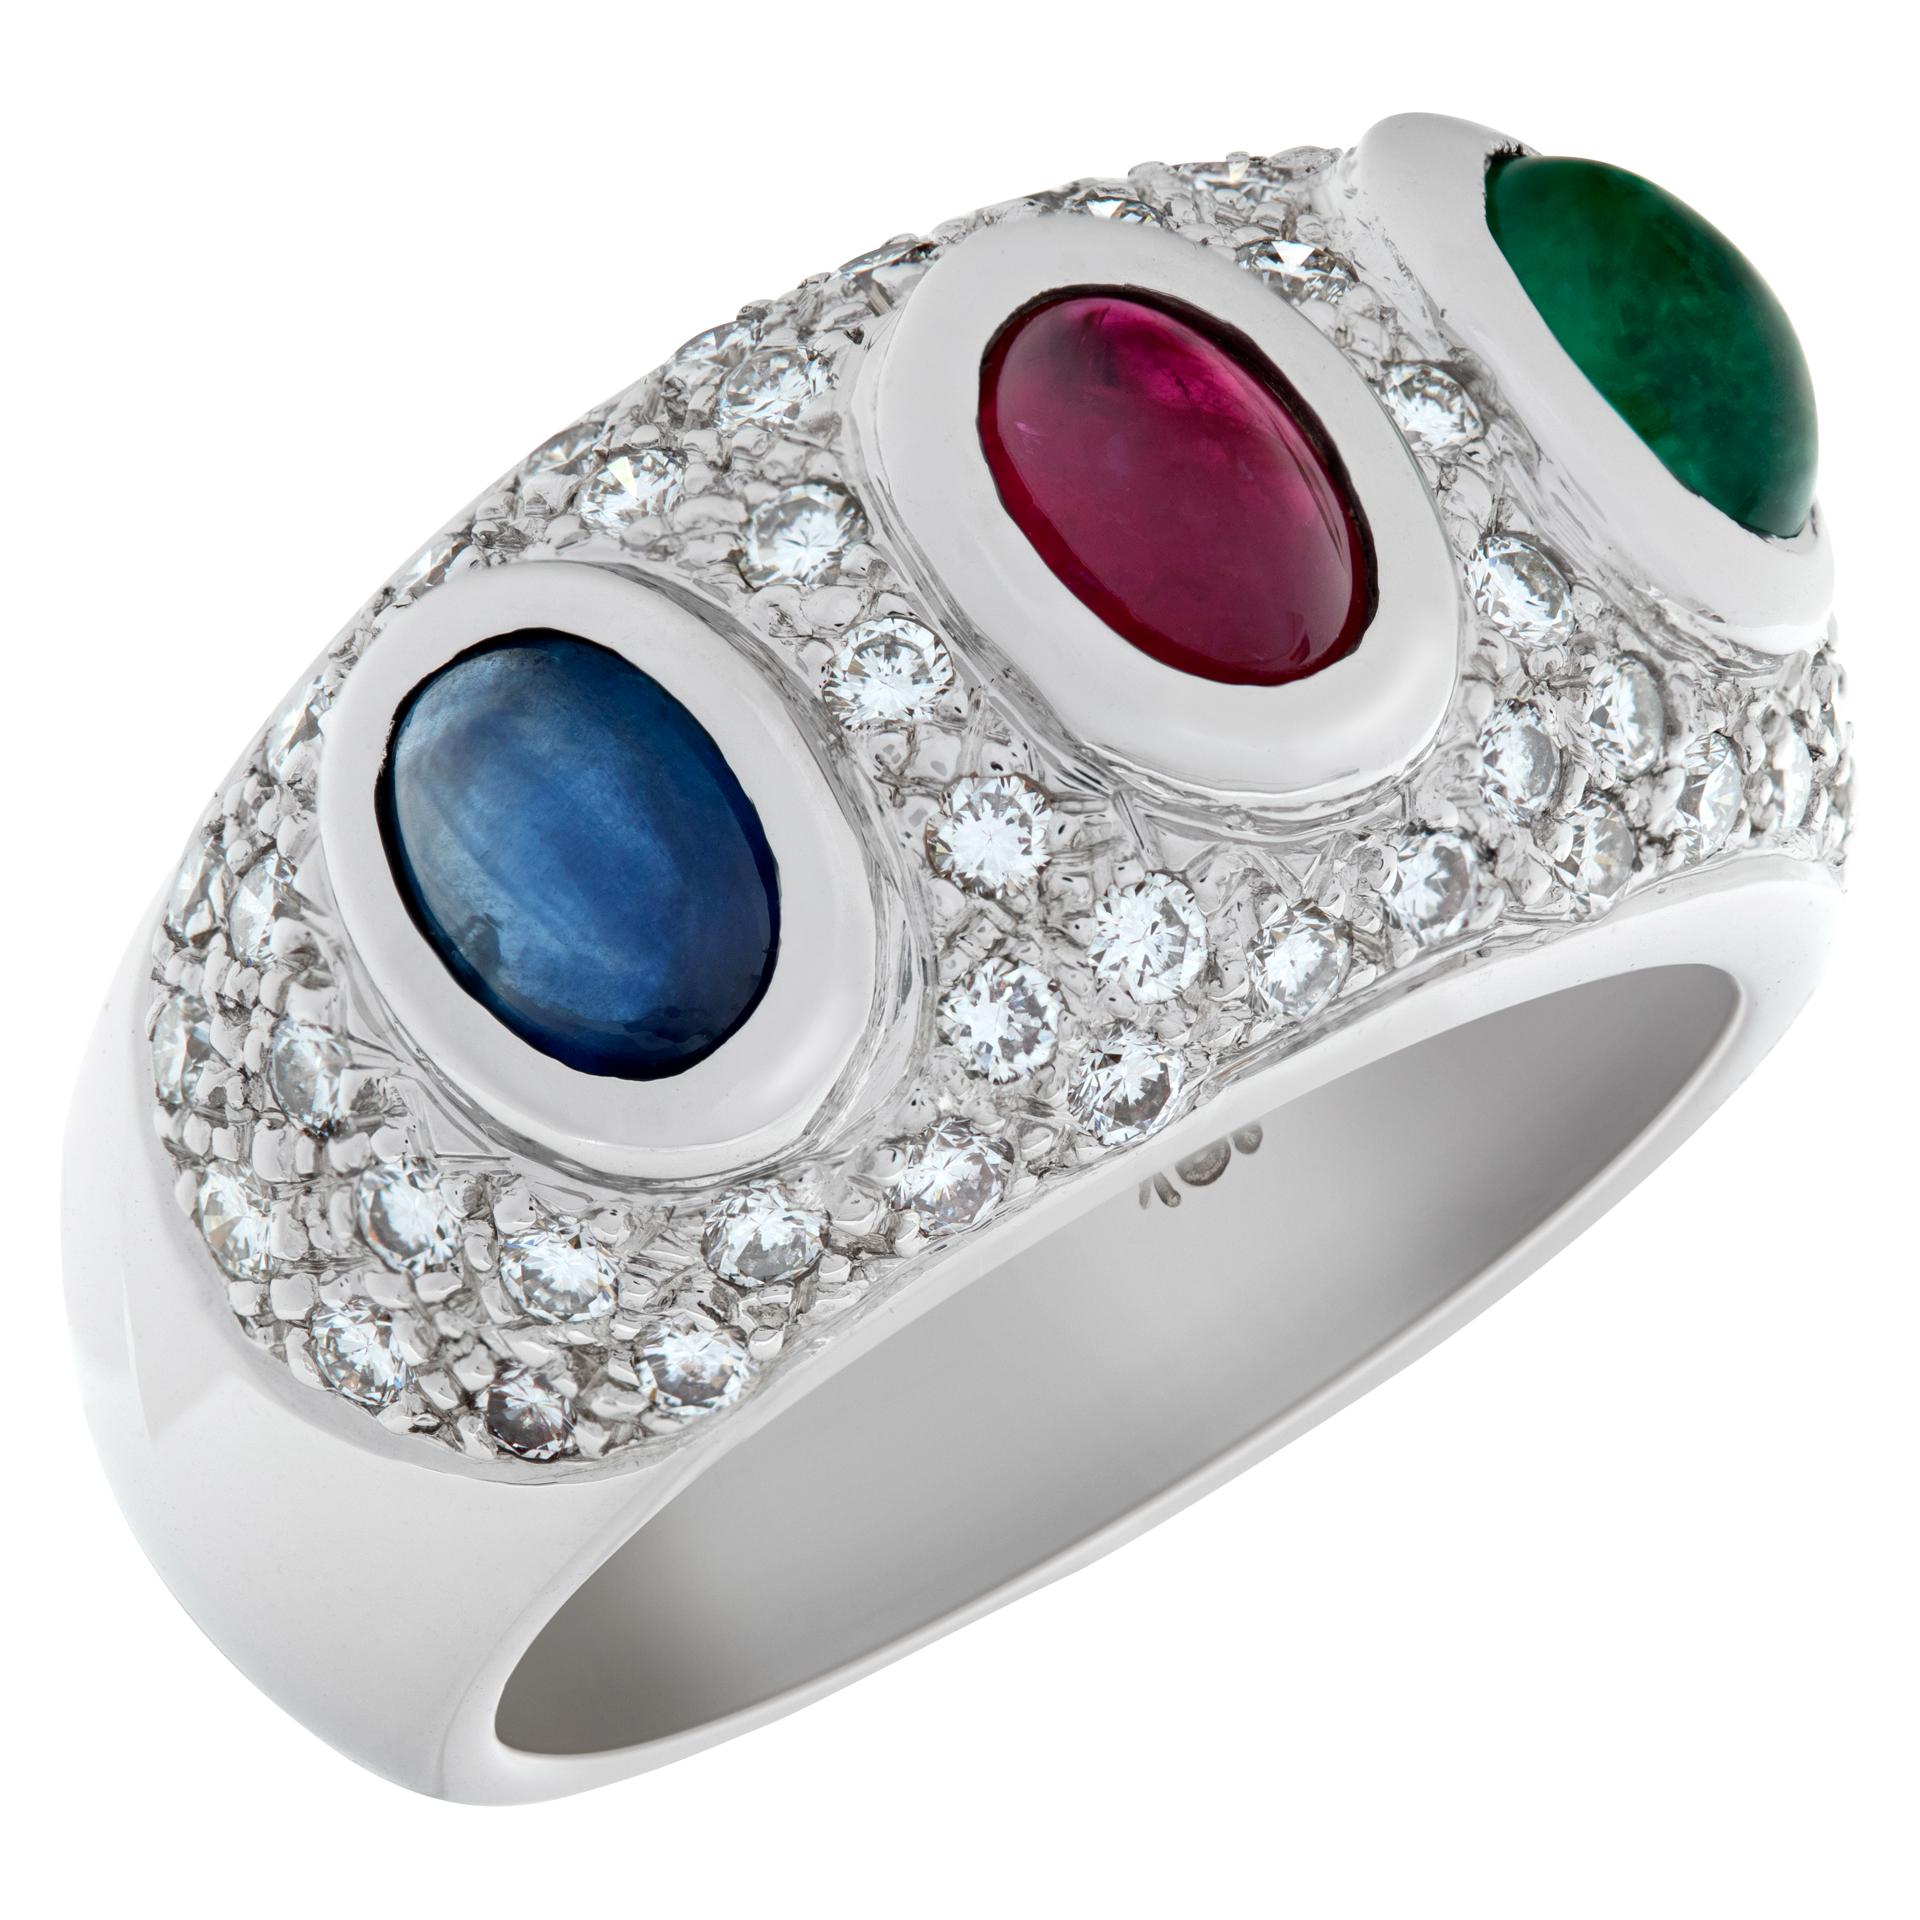 White gold pave diamond ring with cabochon sapphire ruby & emerald In Excellent Condition For Sale In Surfside, FL